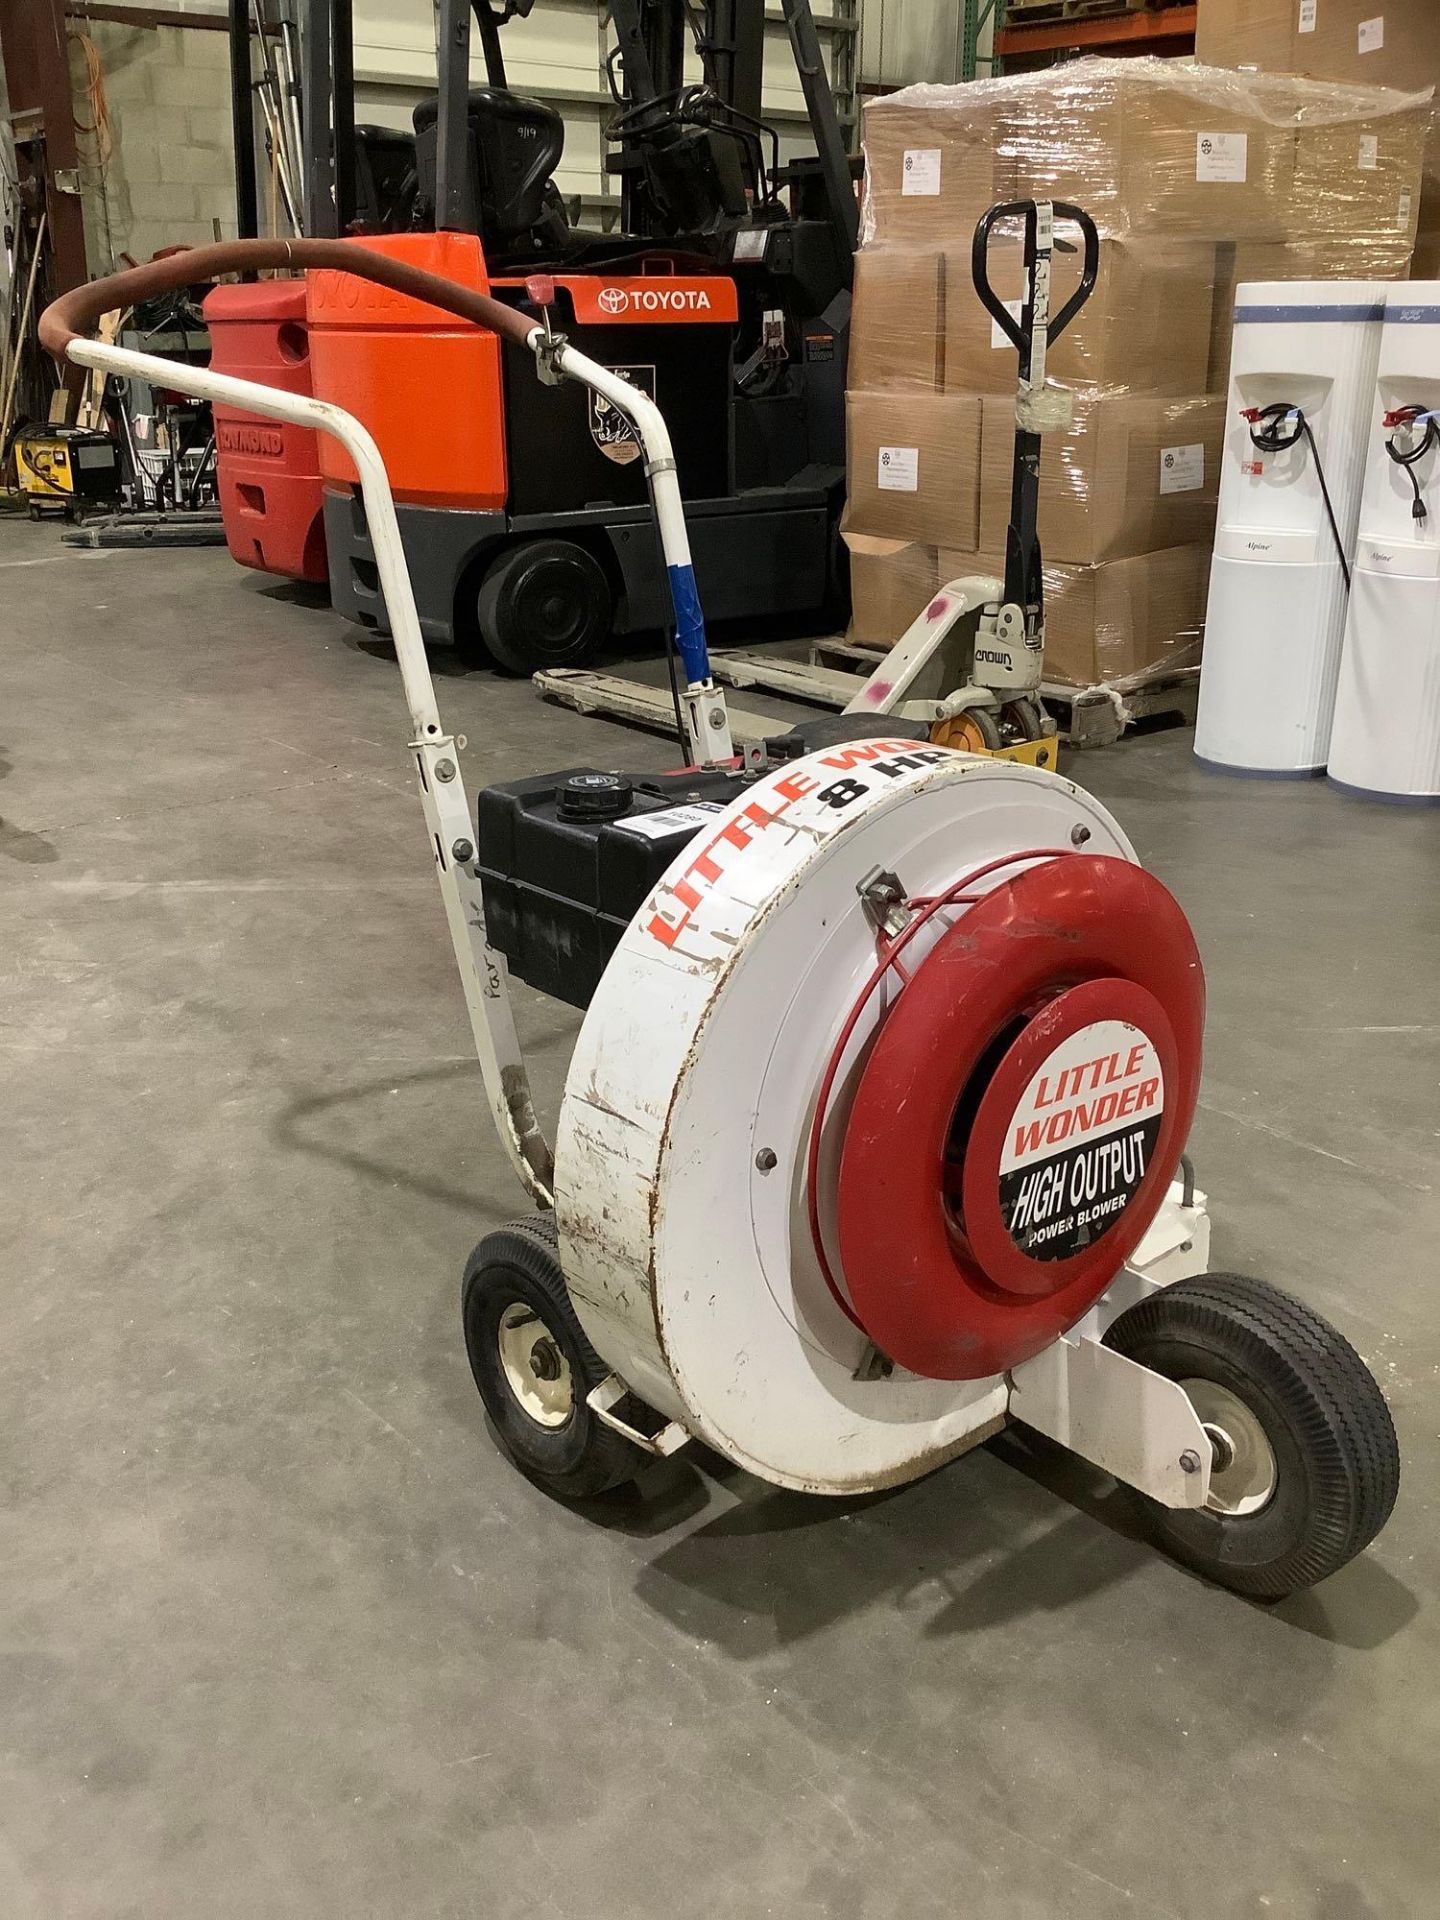 LITTLE WONDER HIGH OUTPUT BLOWER MODEL9810HO WITH BRIGGS & STRATTON INDUSTRIAL PLUS 8HP MOTOR, GAS P